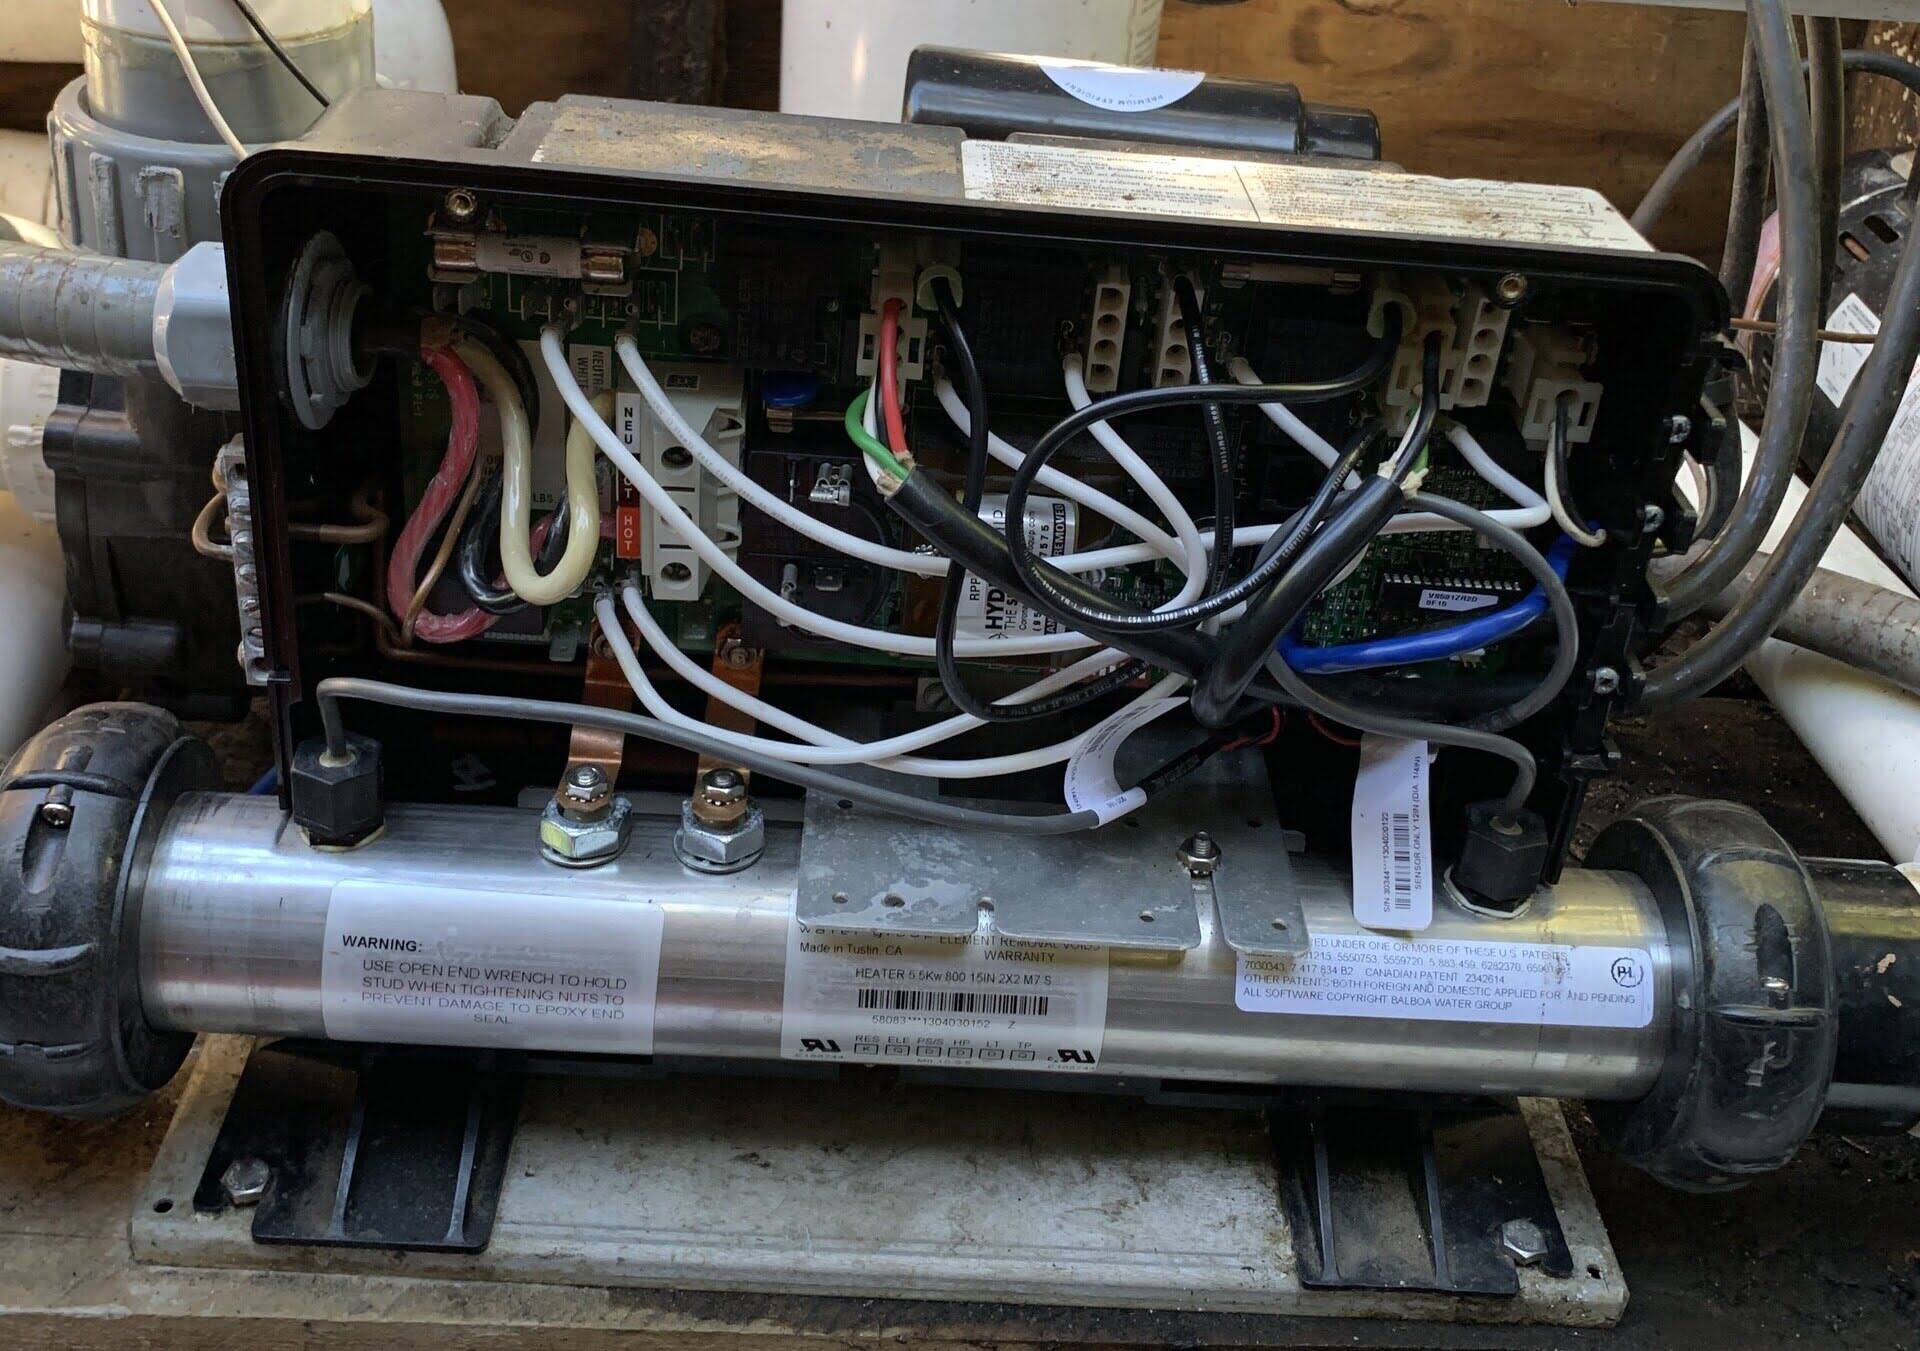 How To Replace A Hot Tub Heater